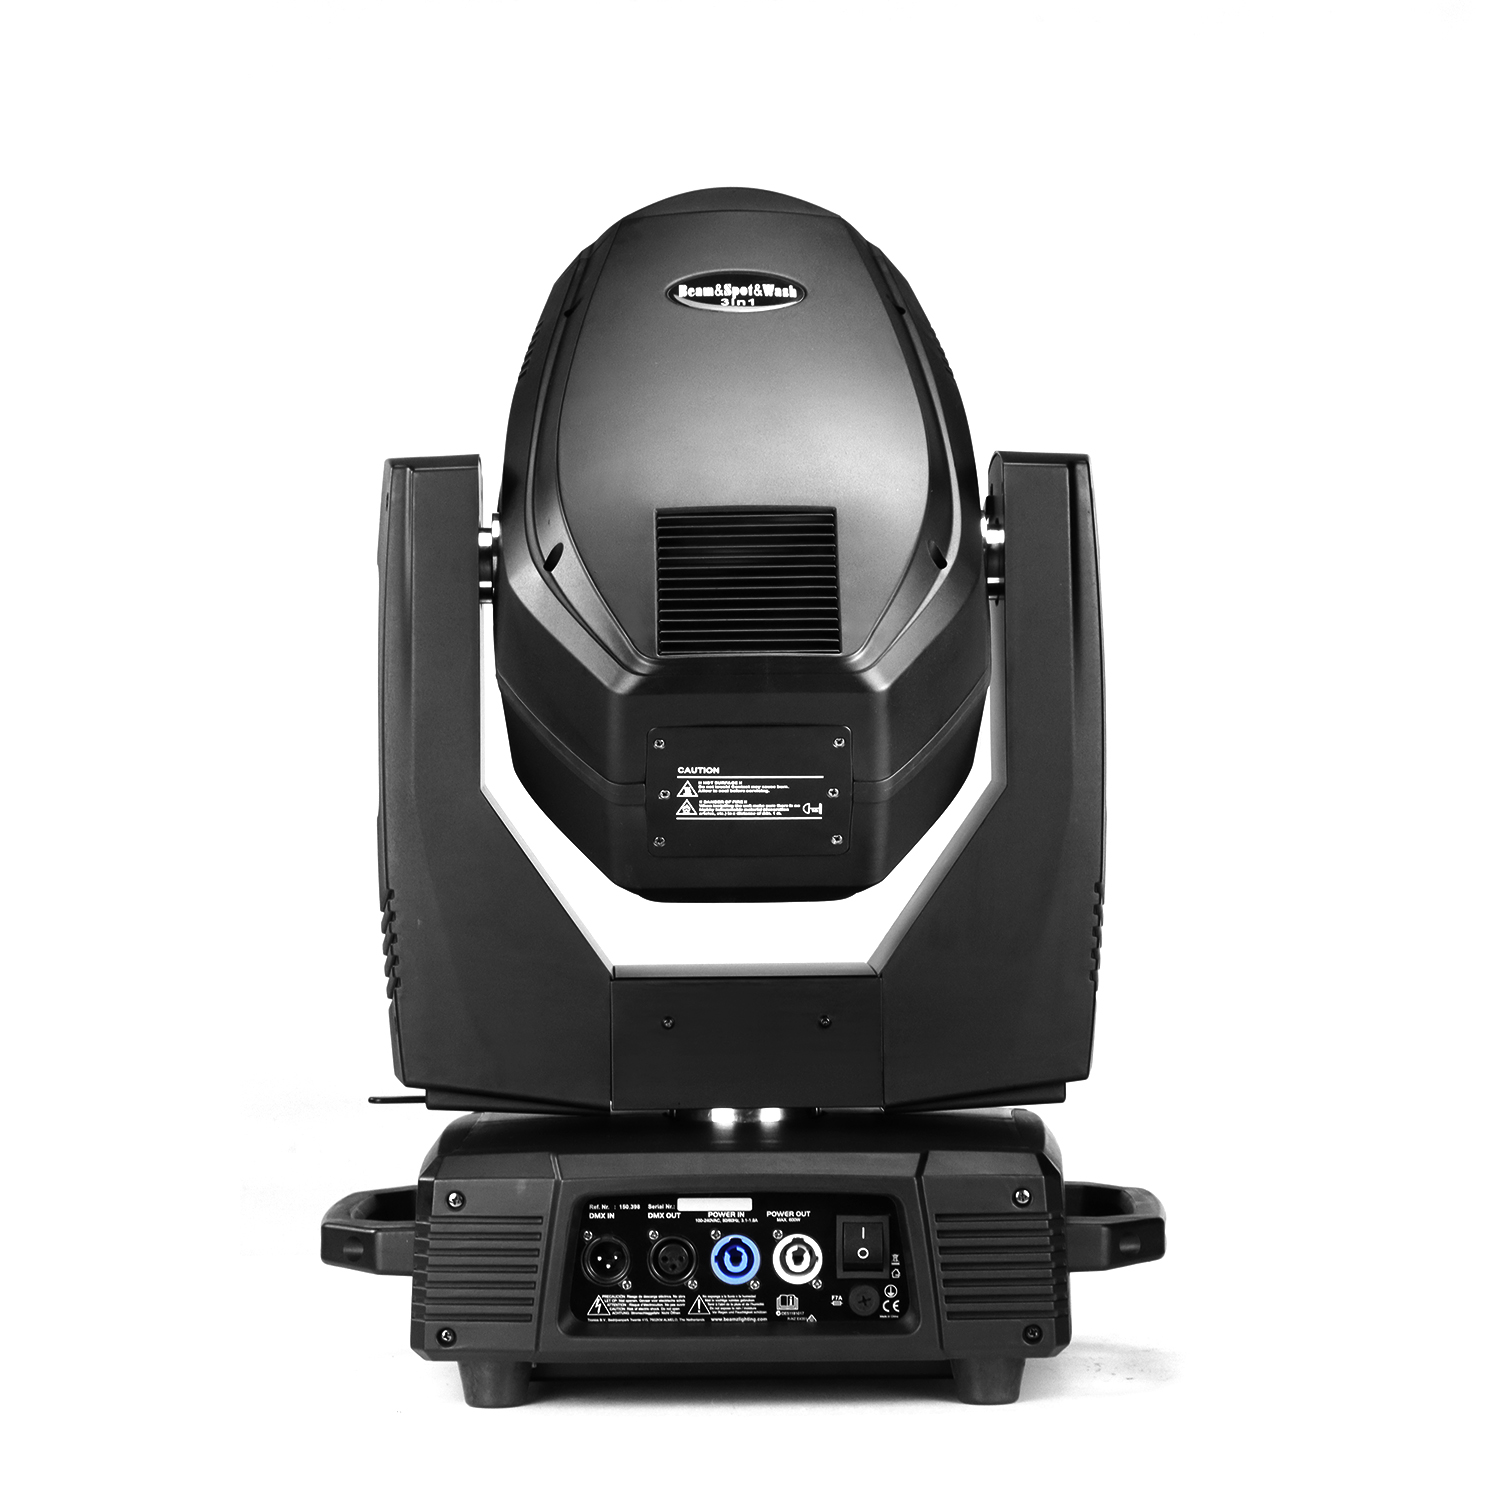 17r Beam Spot Wash Light 350w Moving Head BSW 3in1